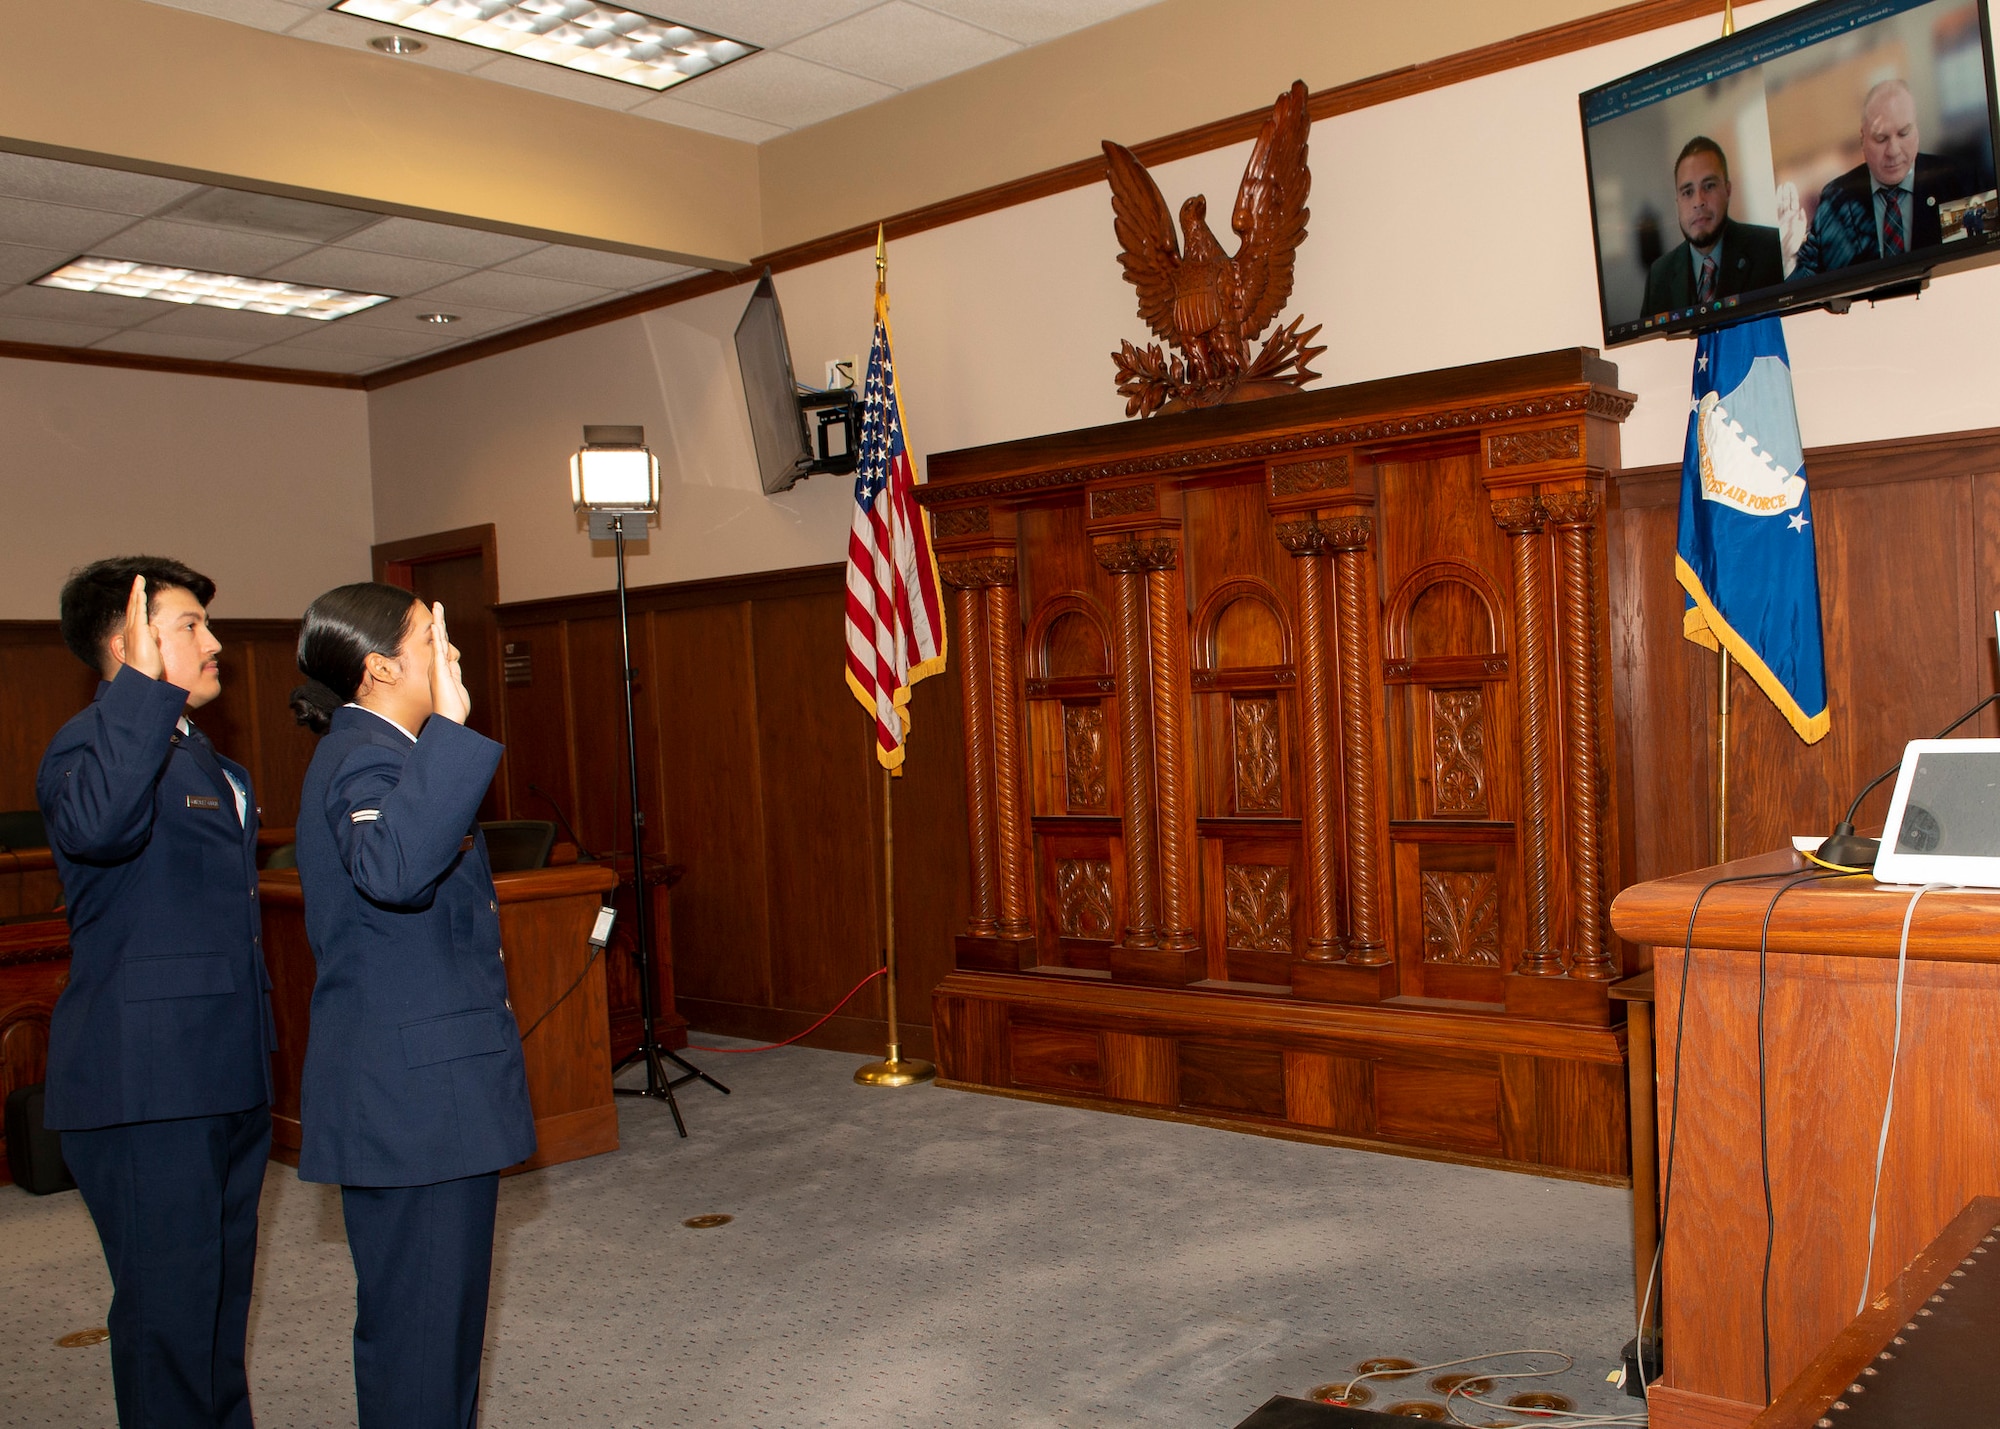 Man and woman swearing in as U.S. citizens